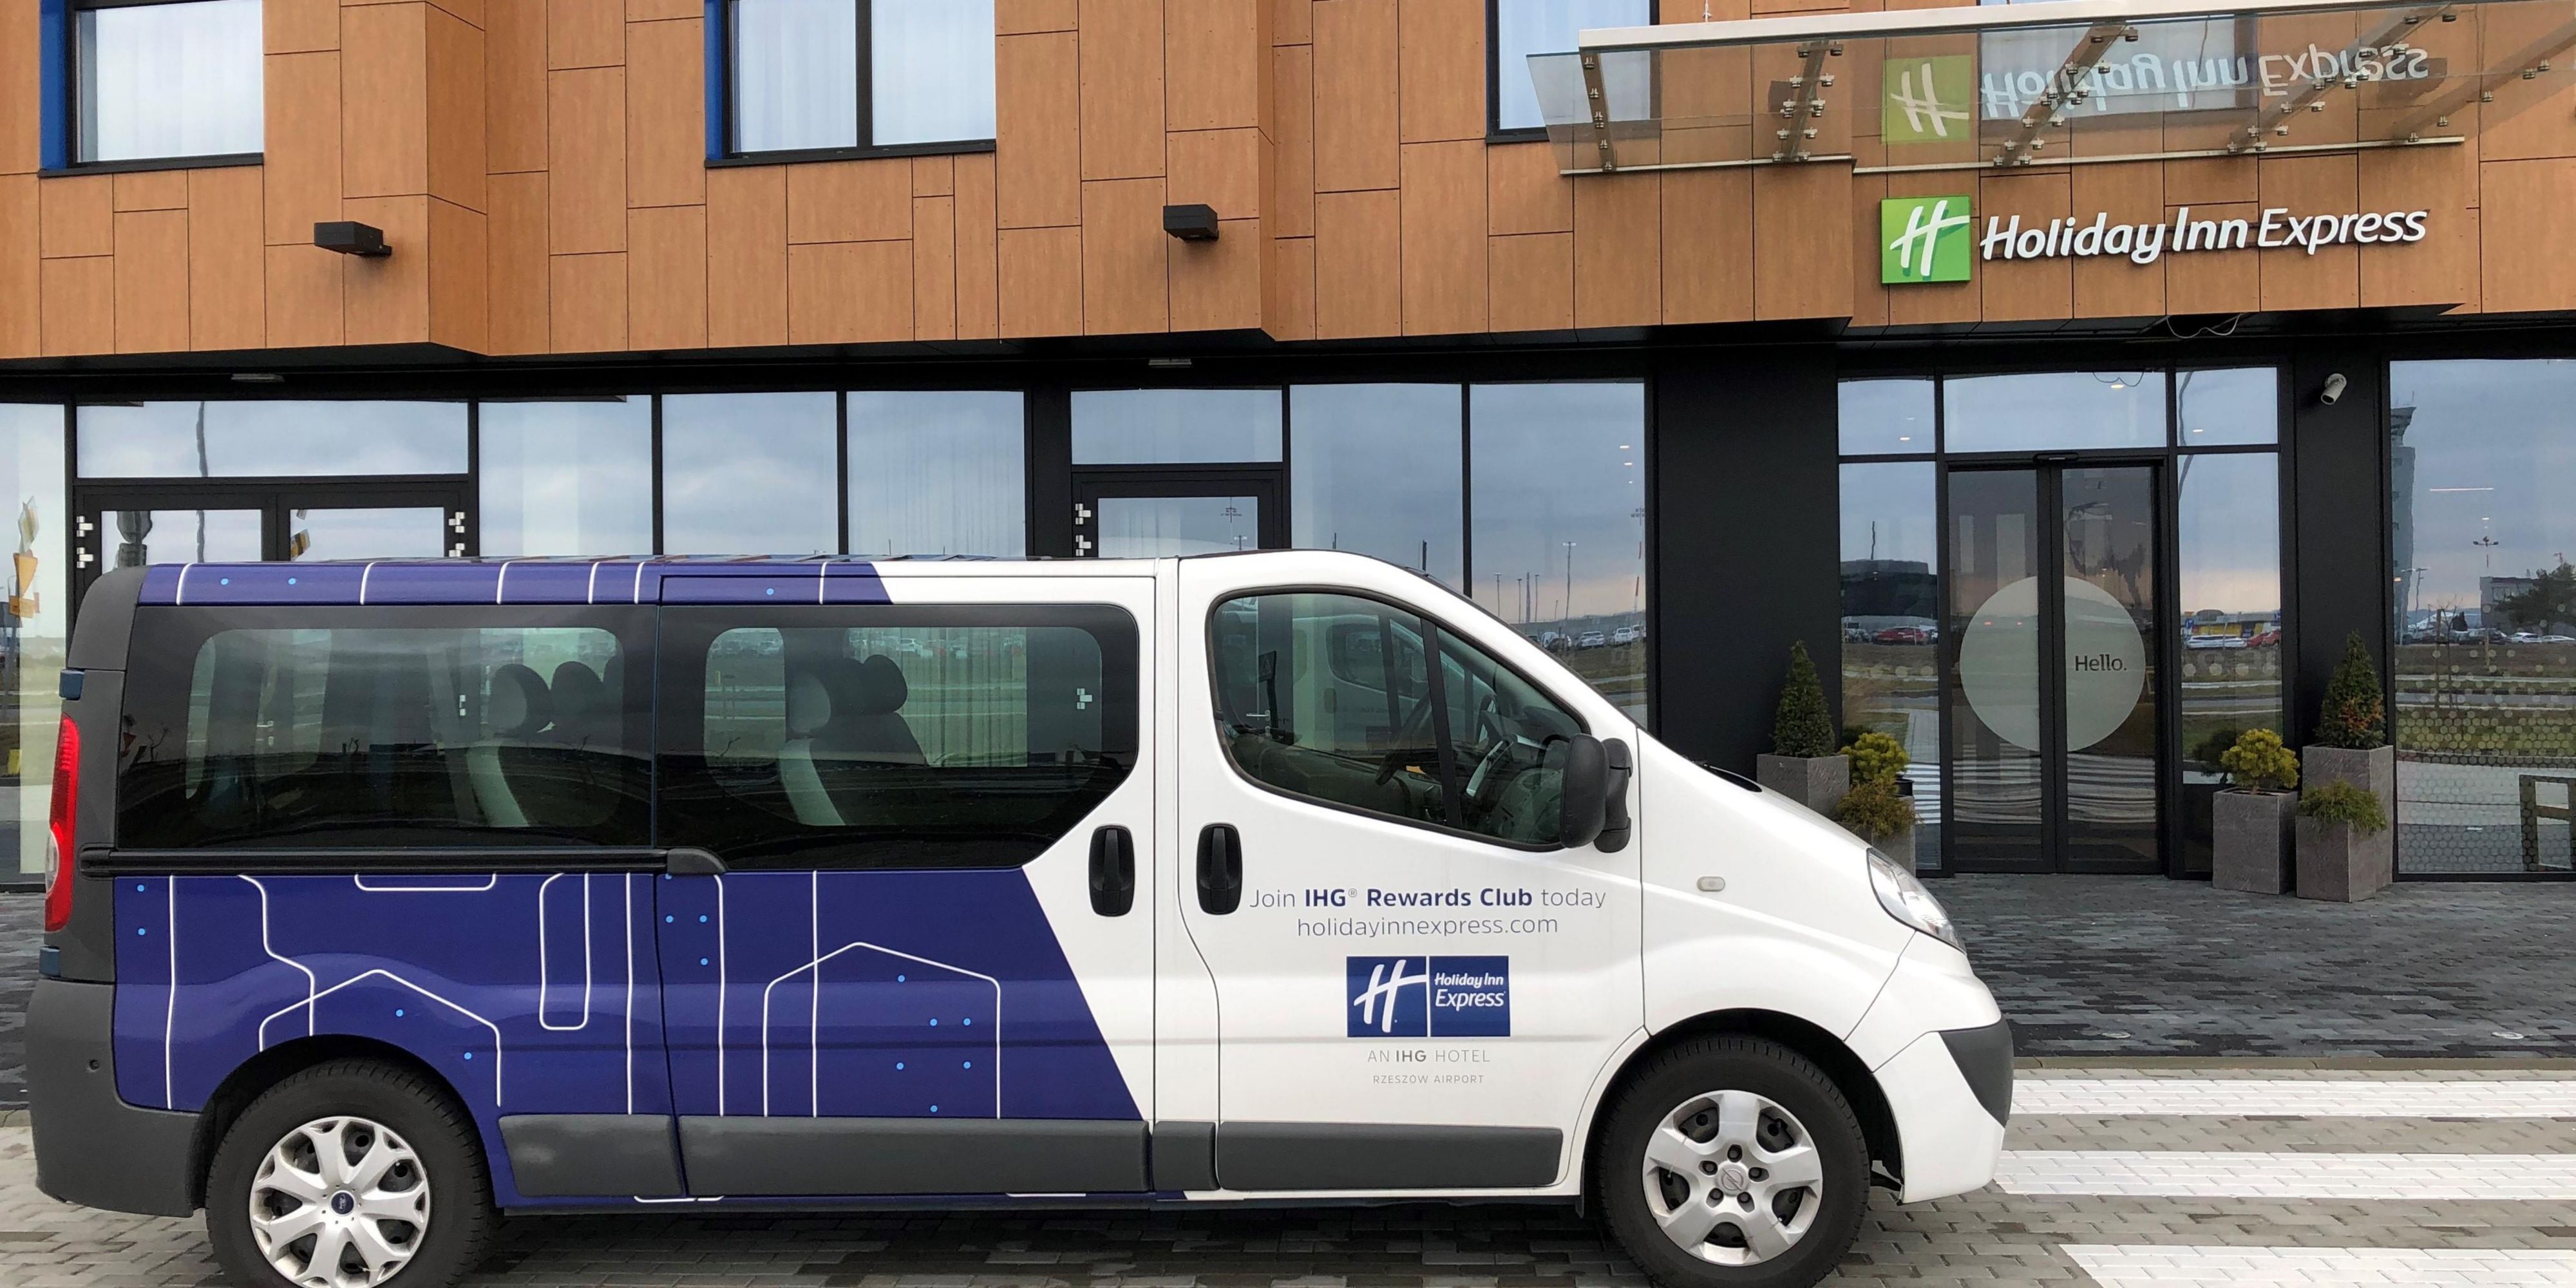 For our guests, the Holiday Inn Express Rzeszów Airport hotel offers a free shuttle bus to and from the airport.